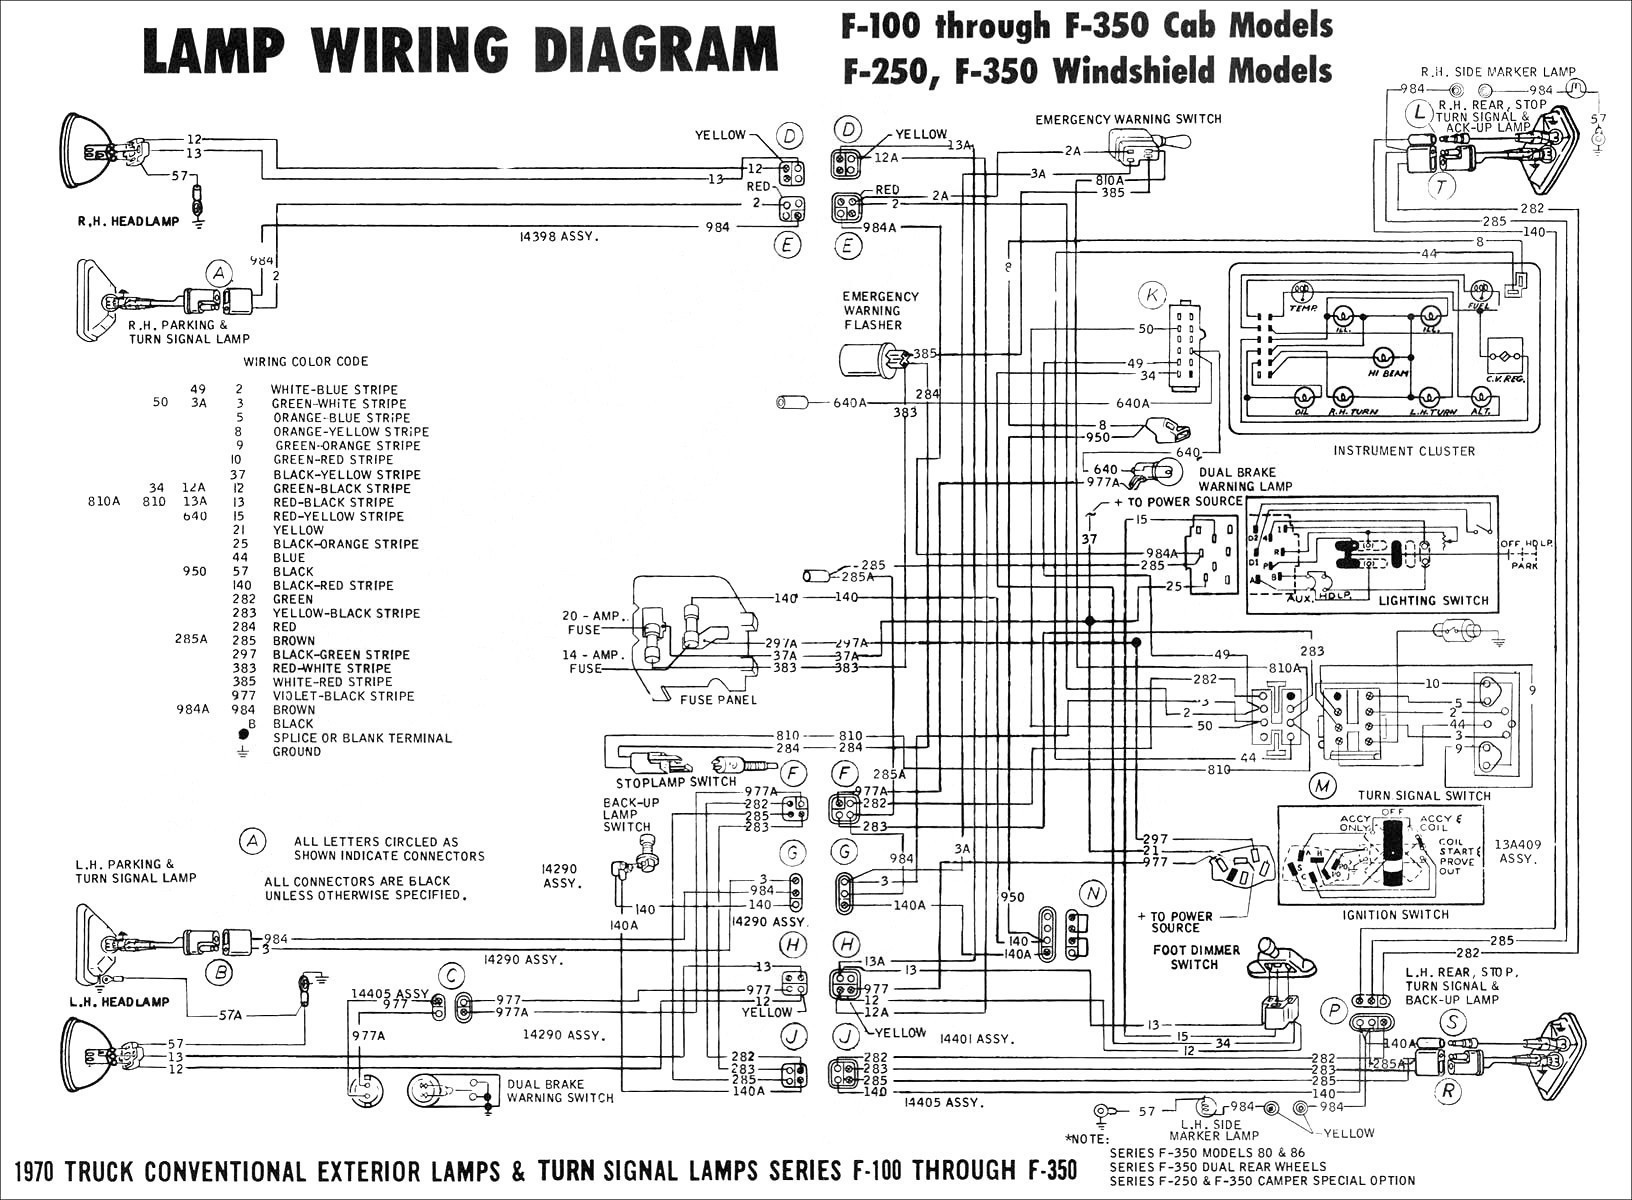 Related with 125 and main breaker panel wiring diagram